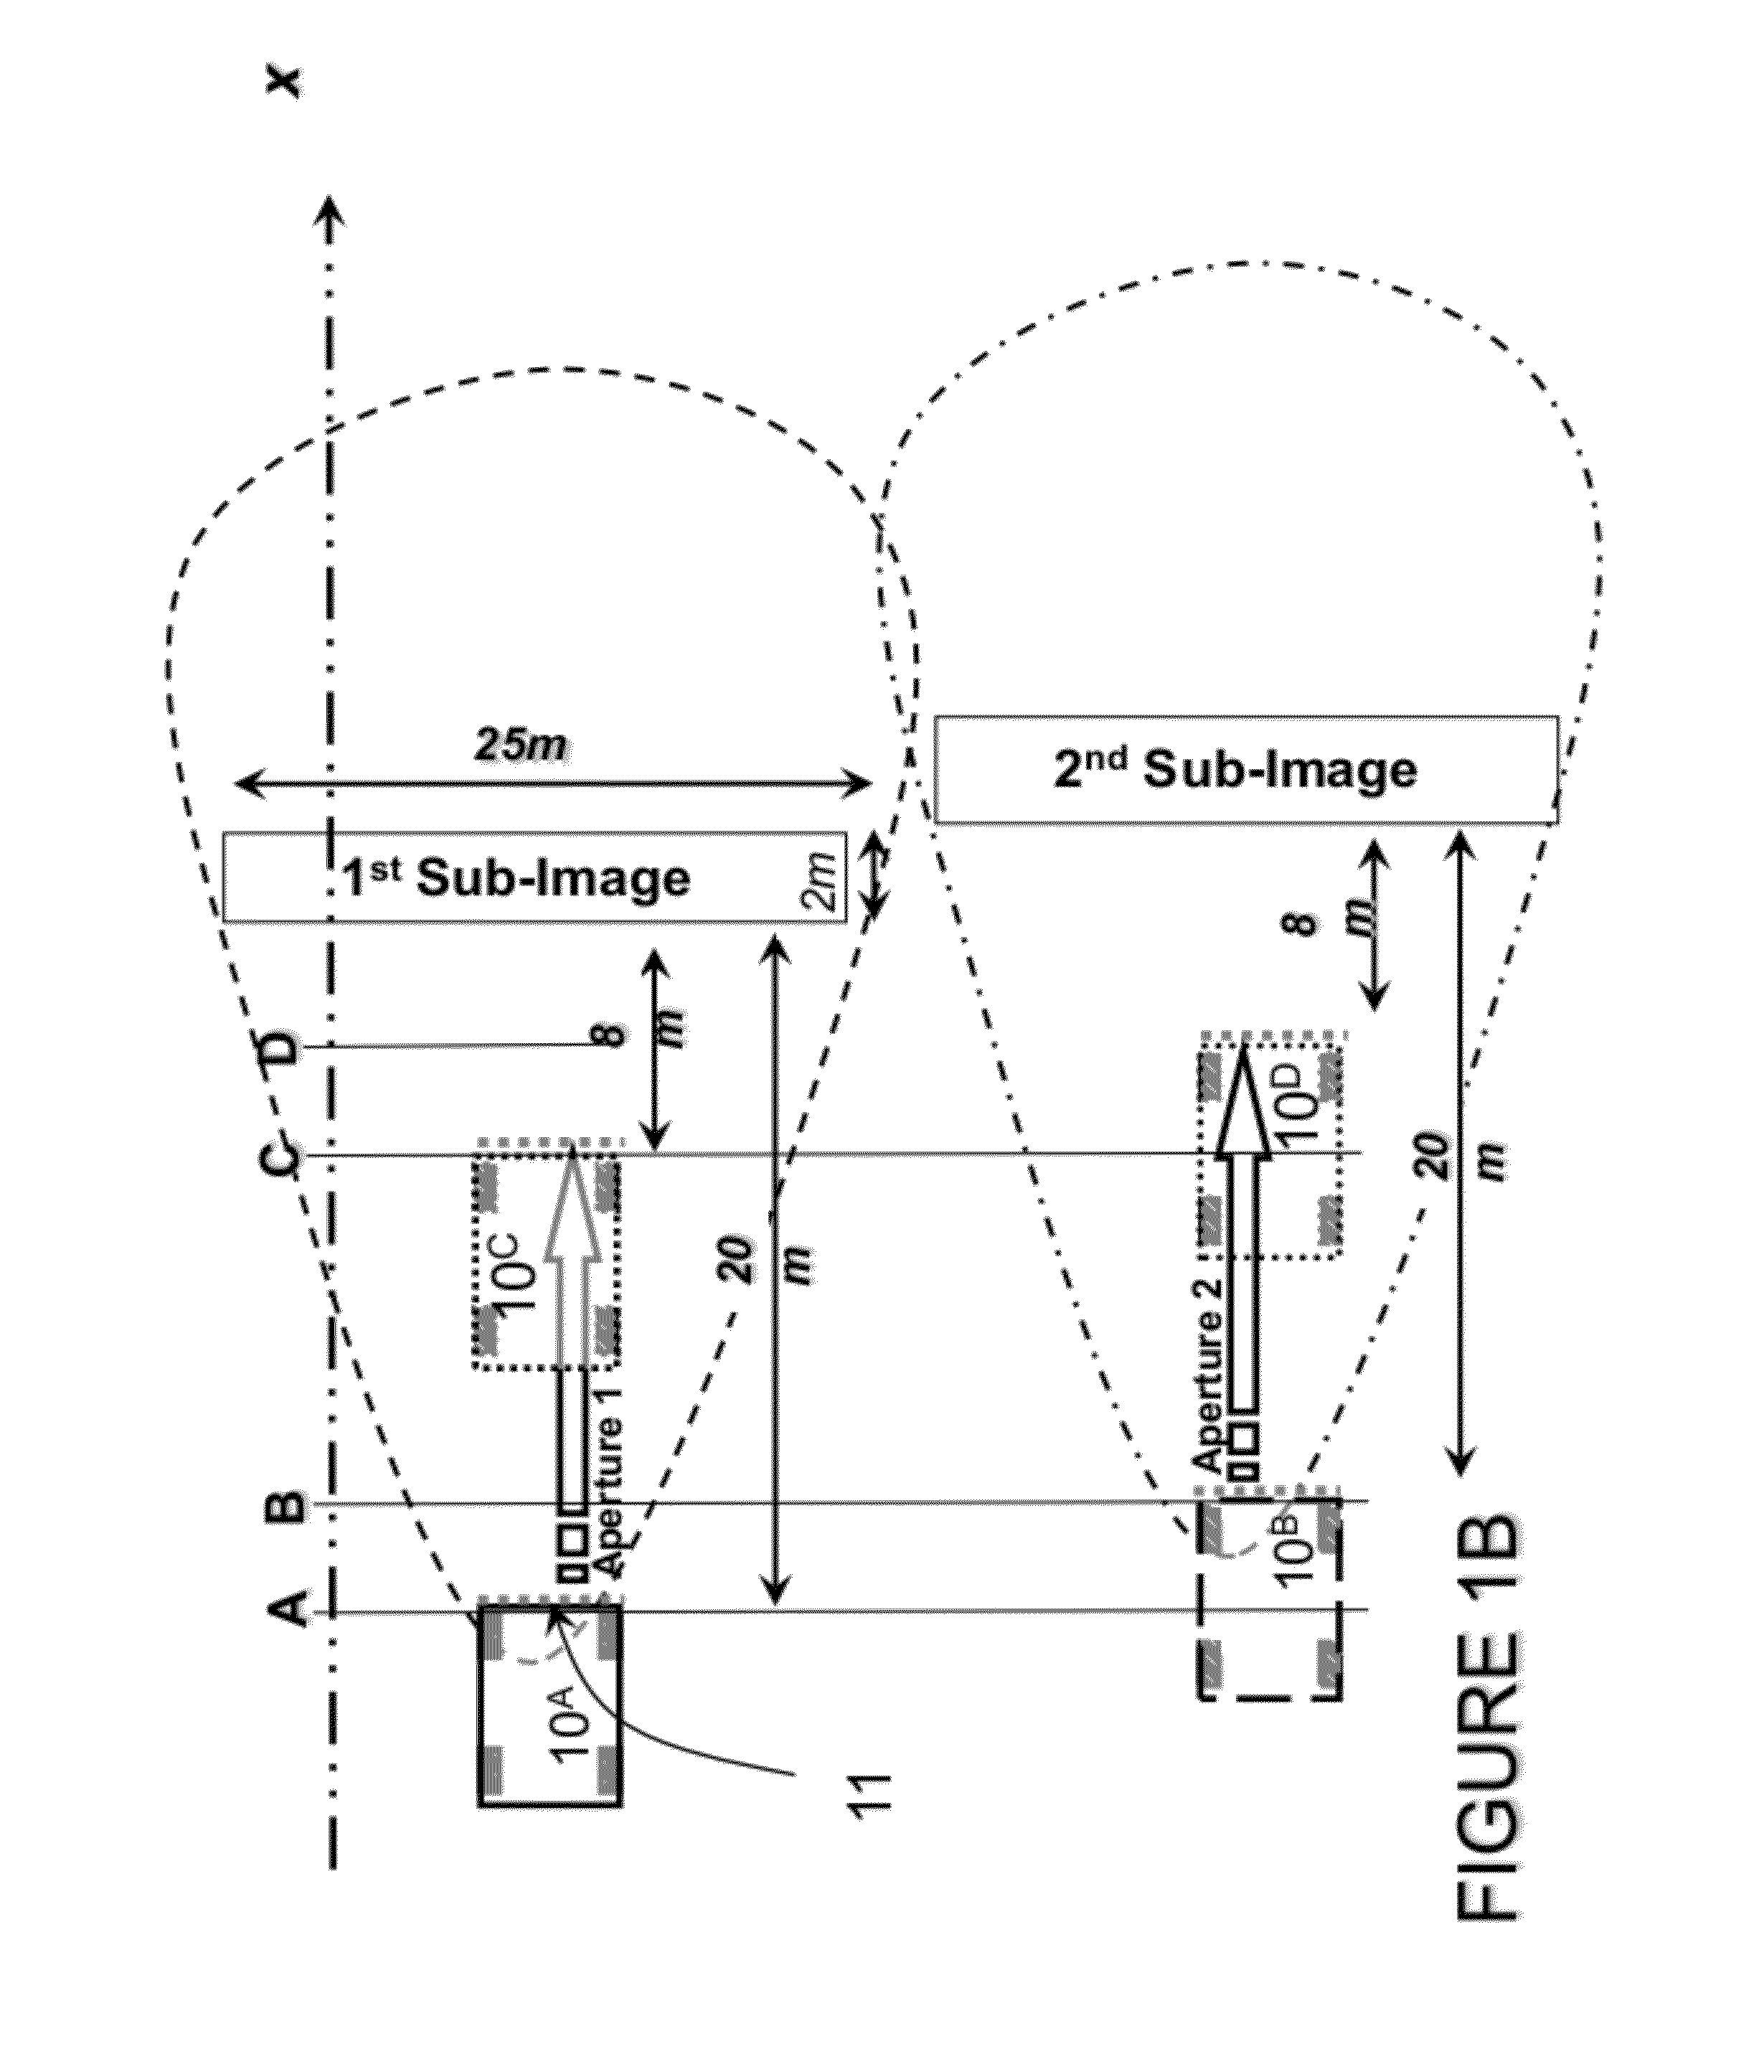 Method and system for forming very low noise imagery using pixel classification